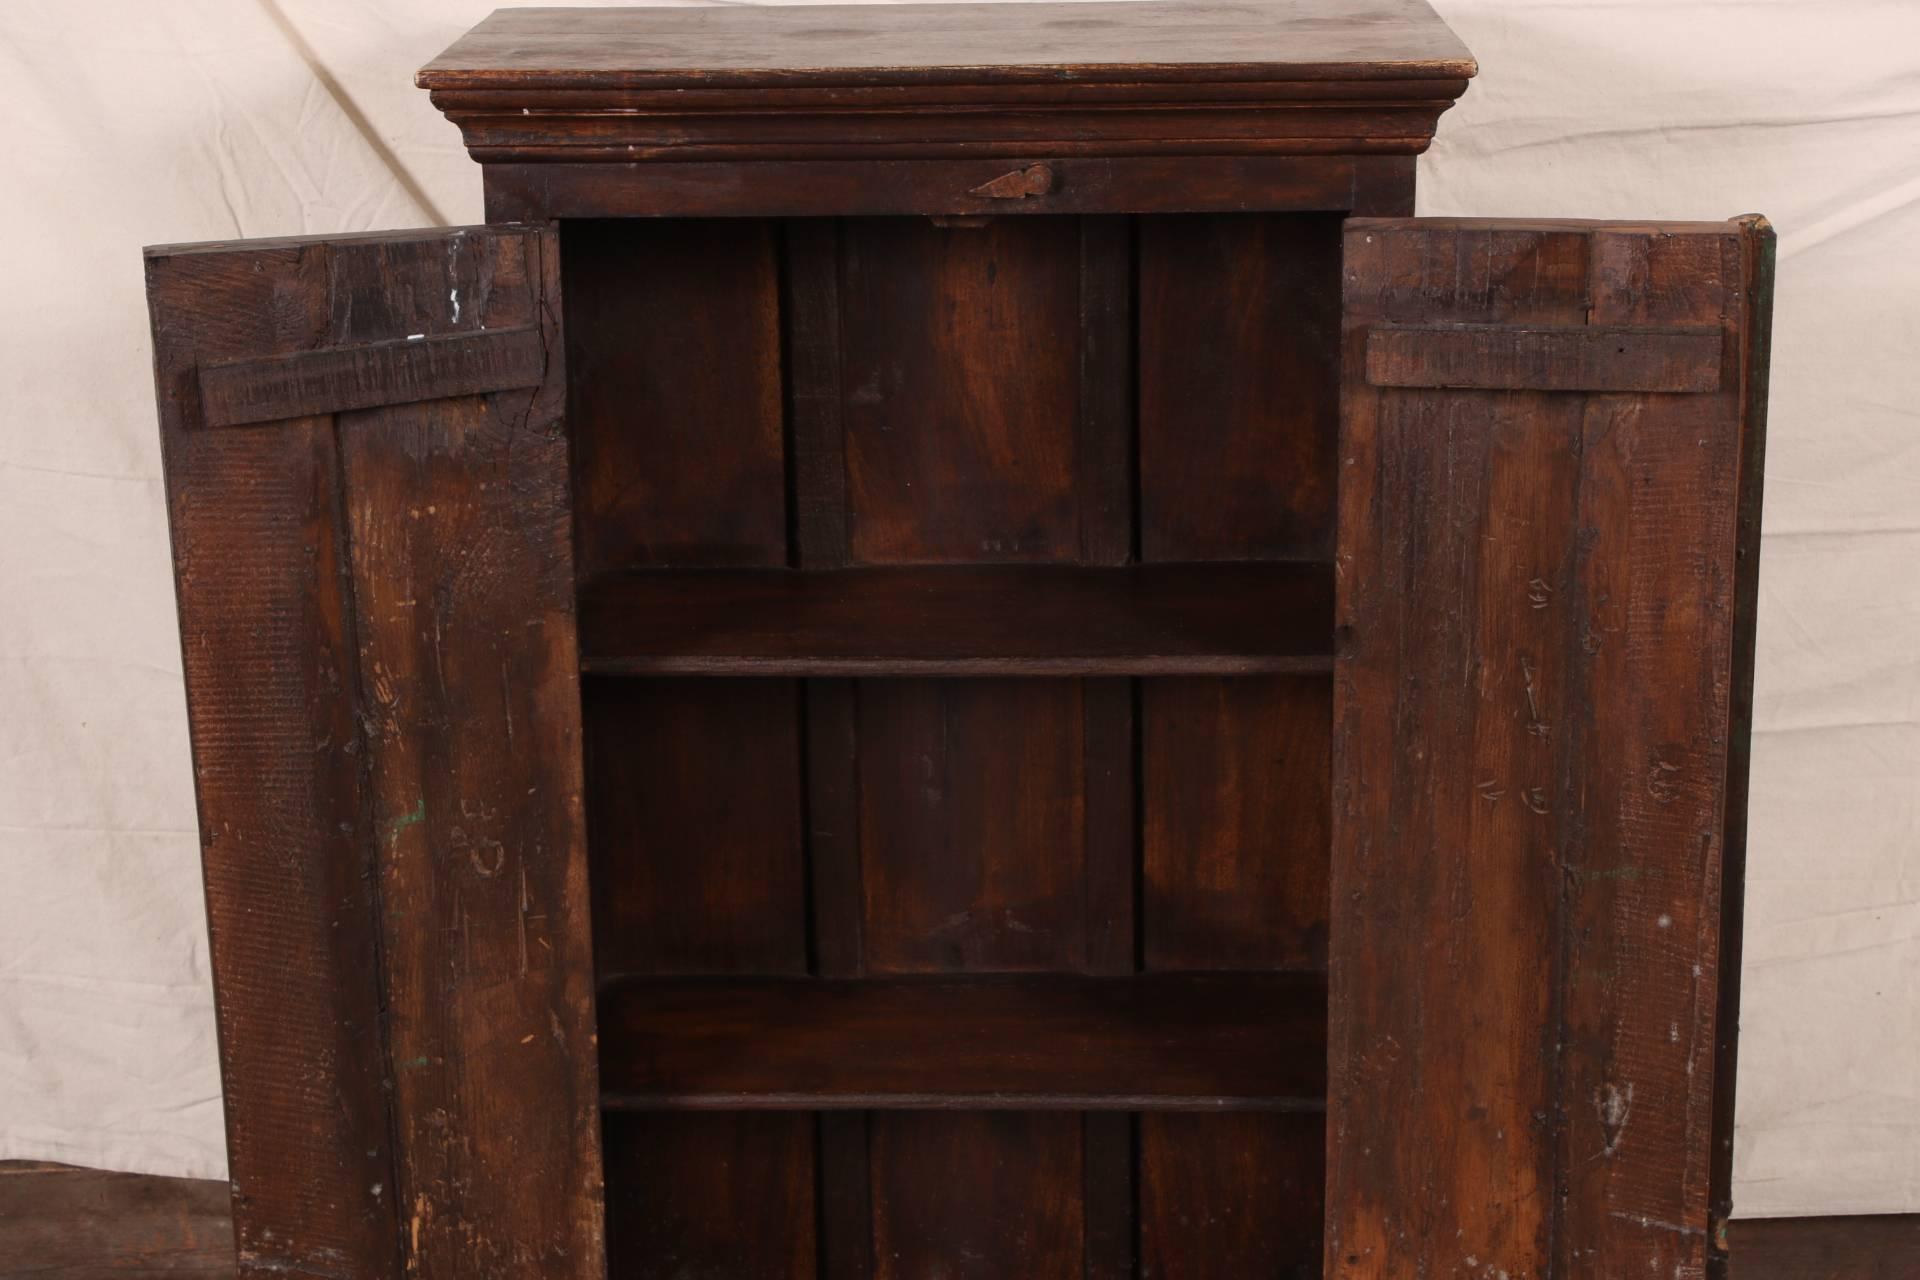 Dark stained wood with an overhanging top, carved double doors in green paint with tab closures above and below and iron ring pulls. Two shelves inside.
Condition: worn top, chip to right door top, wear to the base and weathered doors.